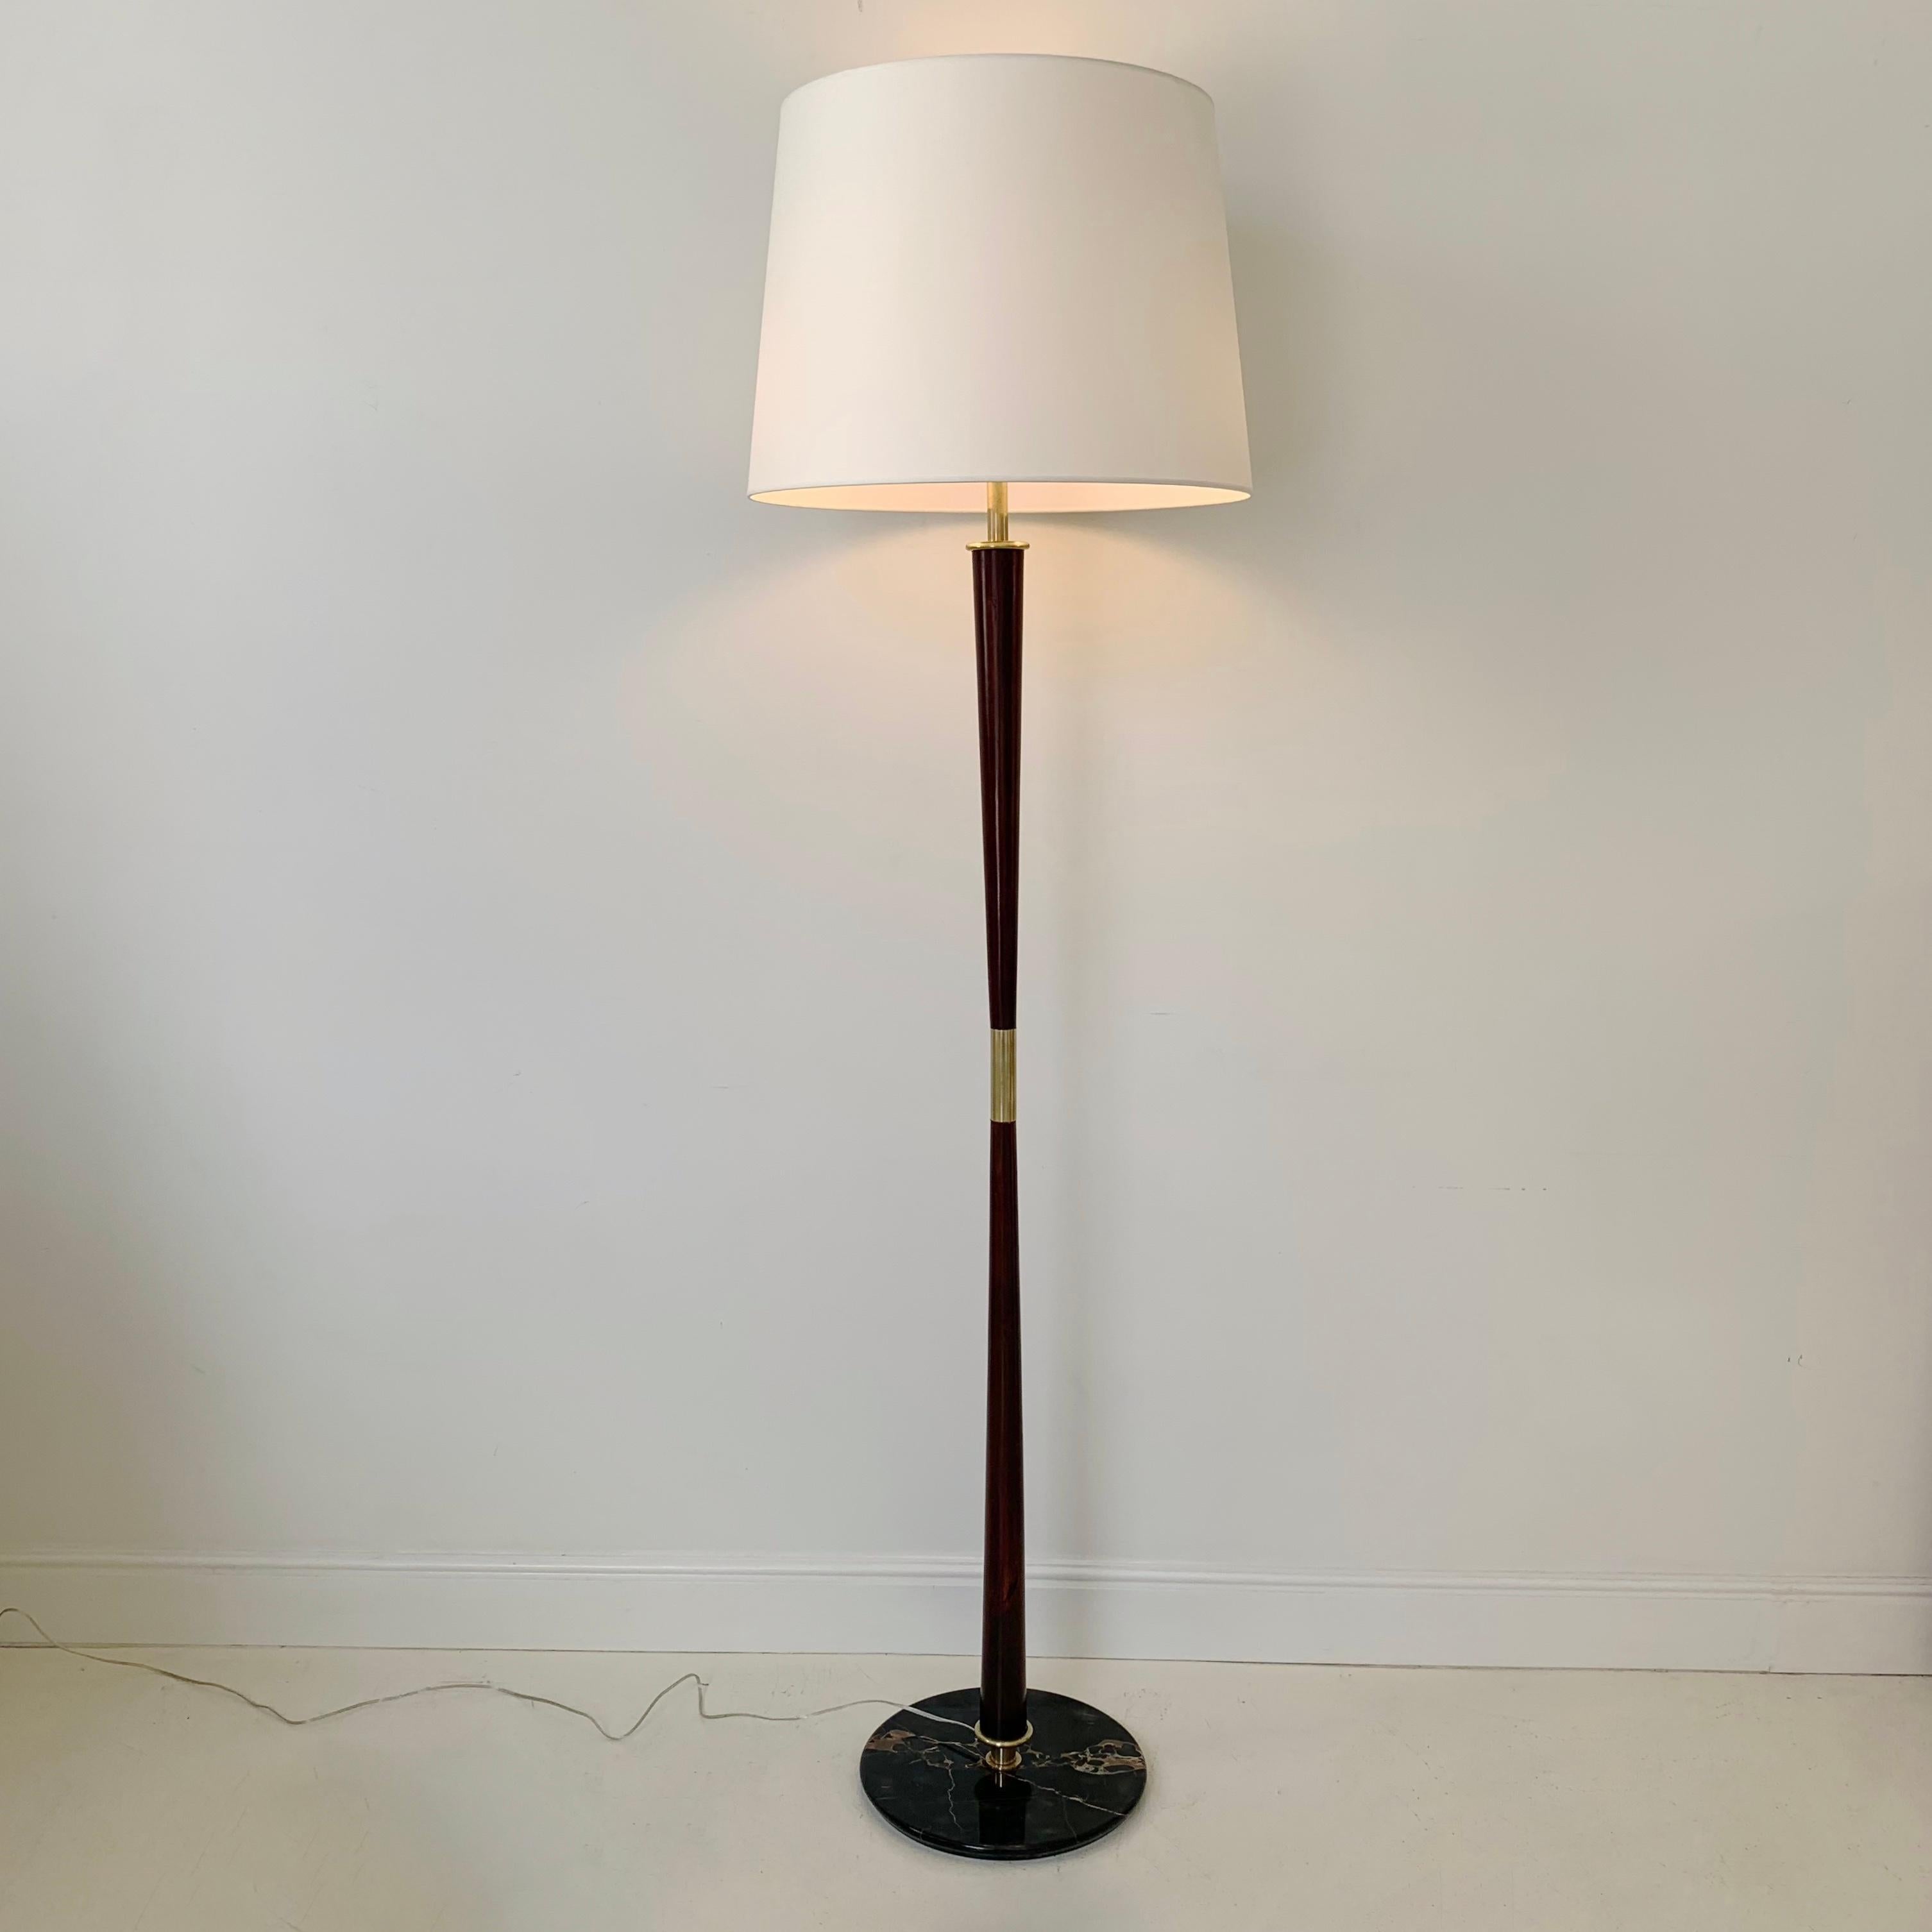 Elegant Stilnovo modern floor lamp, circa 1950, Italy.
Rare portoro marble base, brass details, tinted and polished walnut, new white fabric shade.
Rewired. Two switches. 3 E27 bulbs.
Dimensions: Total height: 176 cm, diameter: 50 cm. 
Original good